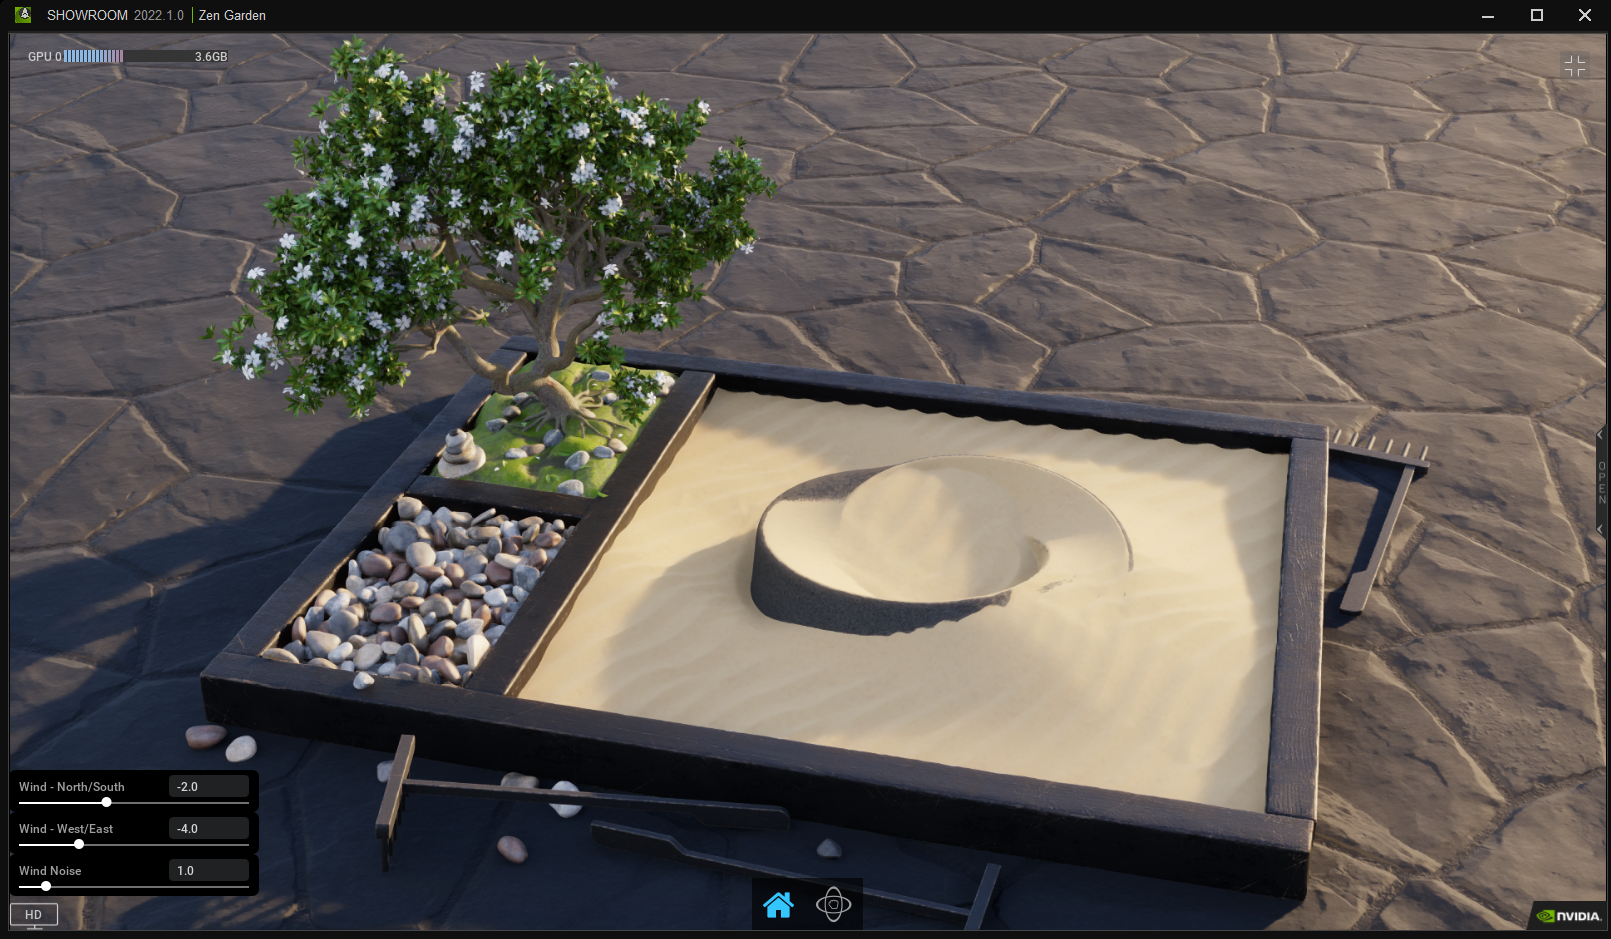 Demo animation with sand in a zen garden reacting to simulated wind